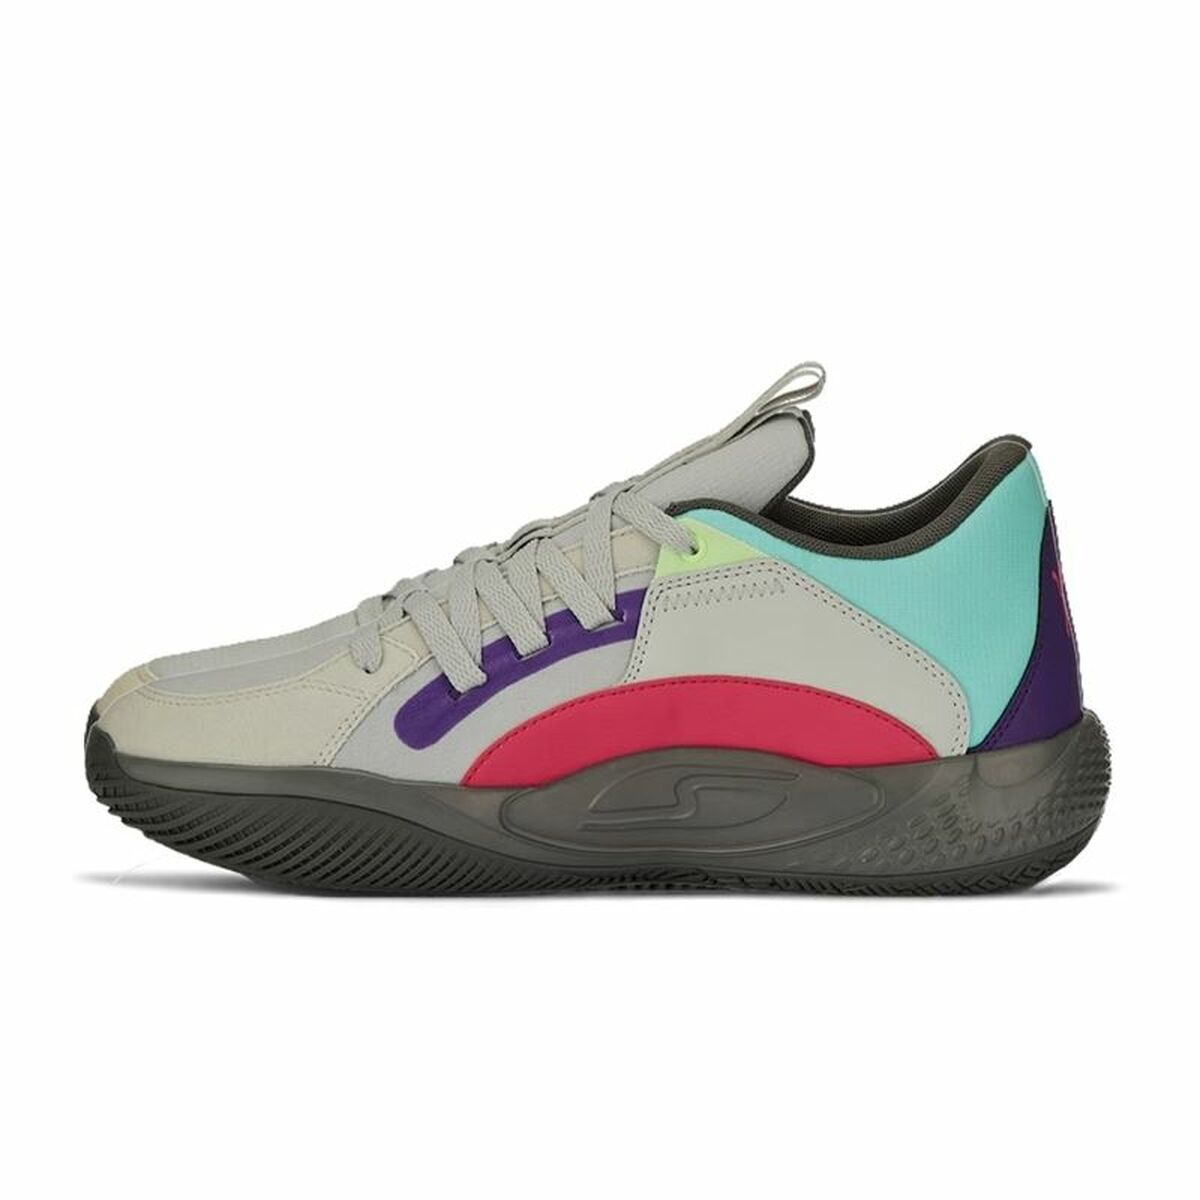 Basketball Shoes for Adults Puma Court Rider Chaos Da Grey